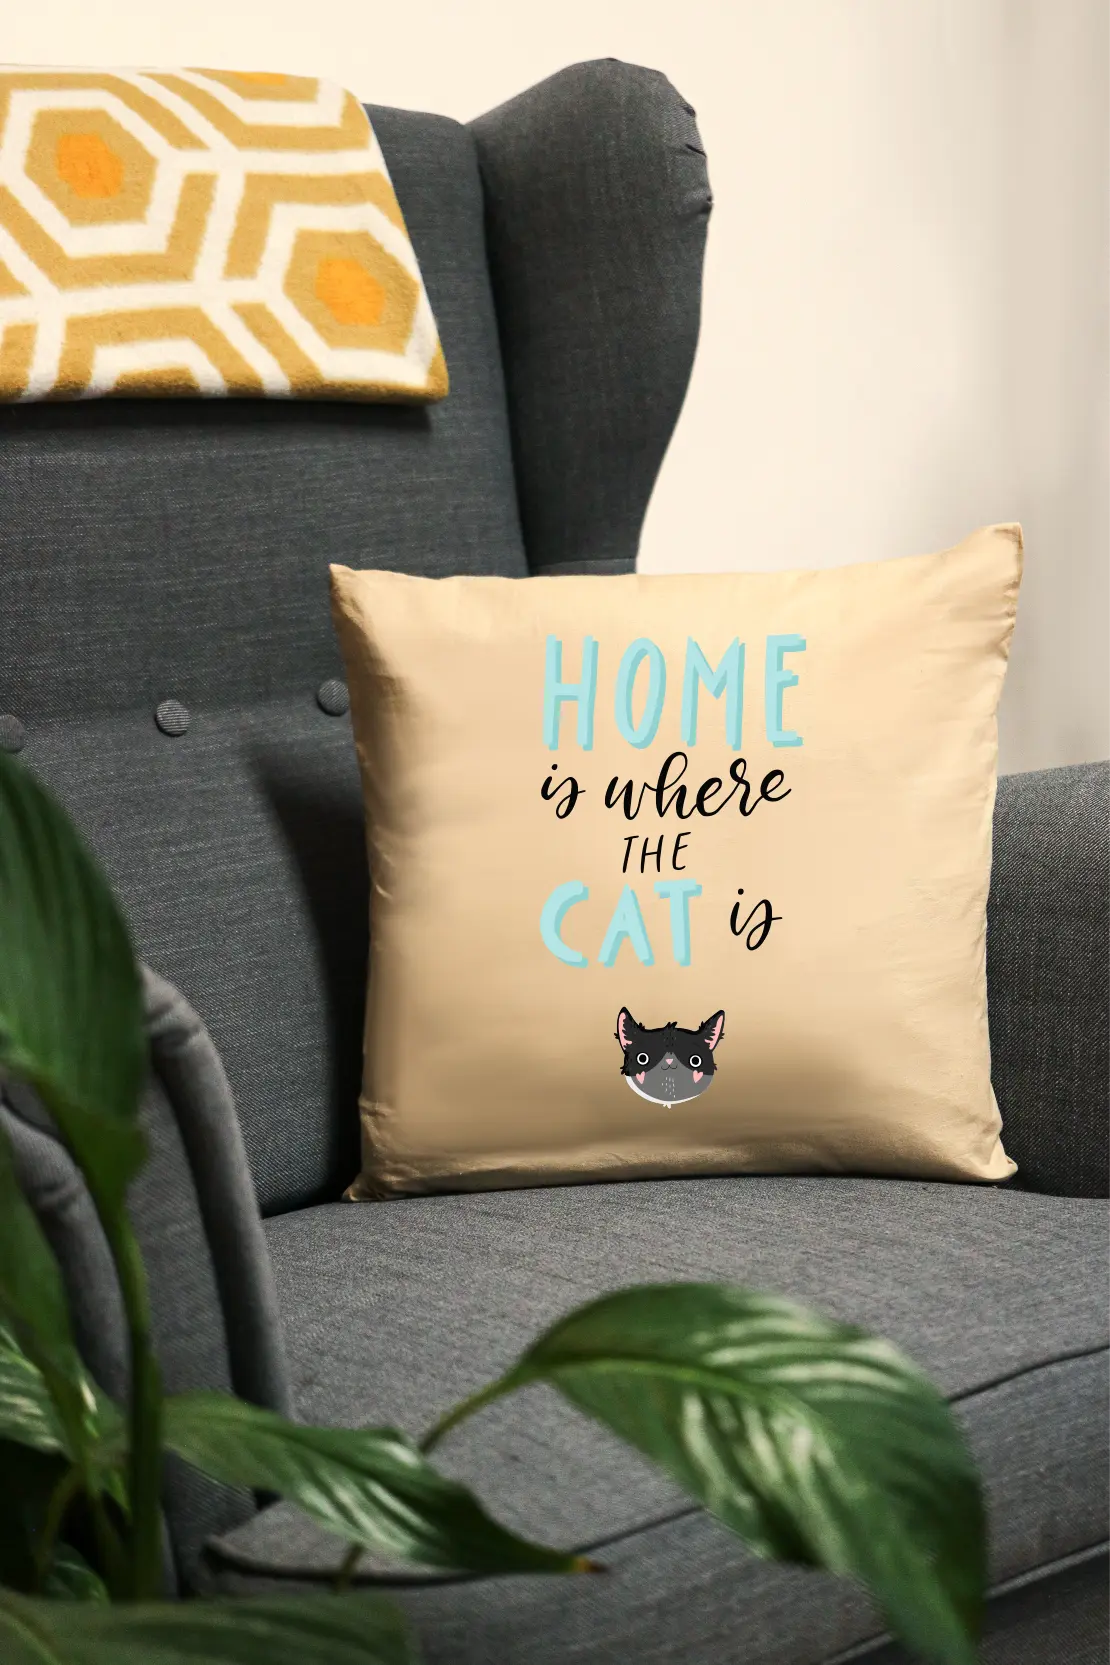 Home is where the cat is | Polster/Kissen      